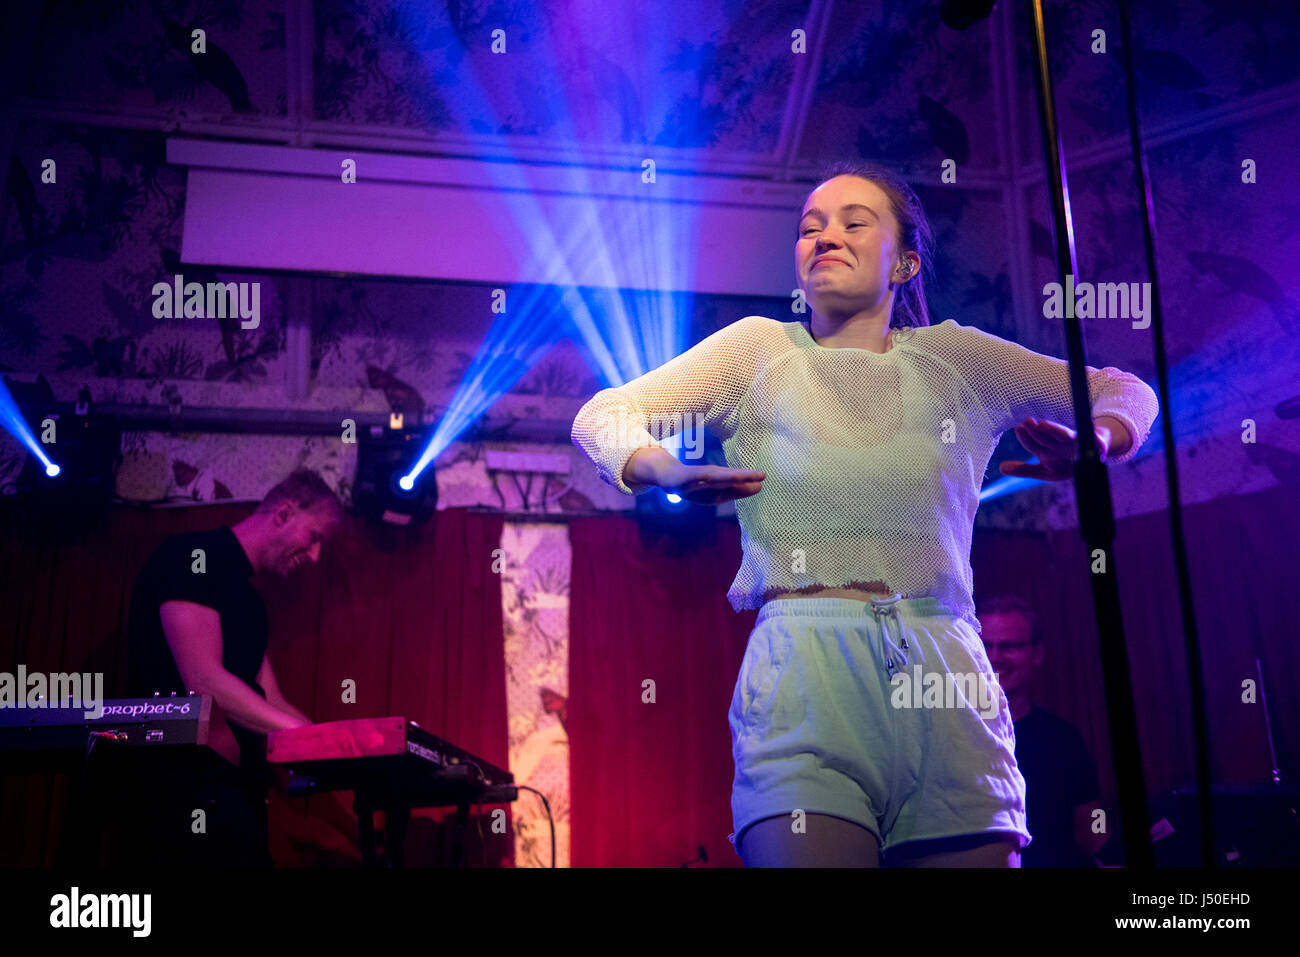 Manchester UK. 15th May 2017. Norweigan singer songwriter Sigrid Solbakk Raabe performs at The Deaf Institute, Manchester UK on her UK tour, Manchester 15/05/2017 © Gary Mather/Alamy Live News Stock Photo